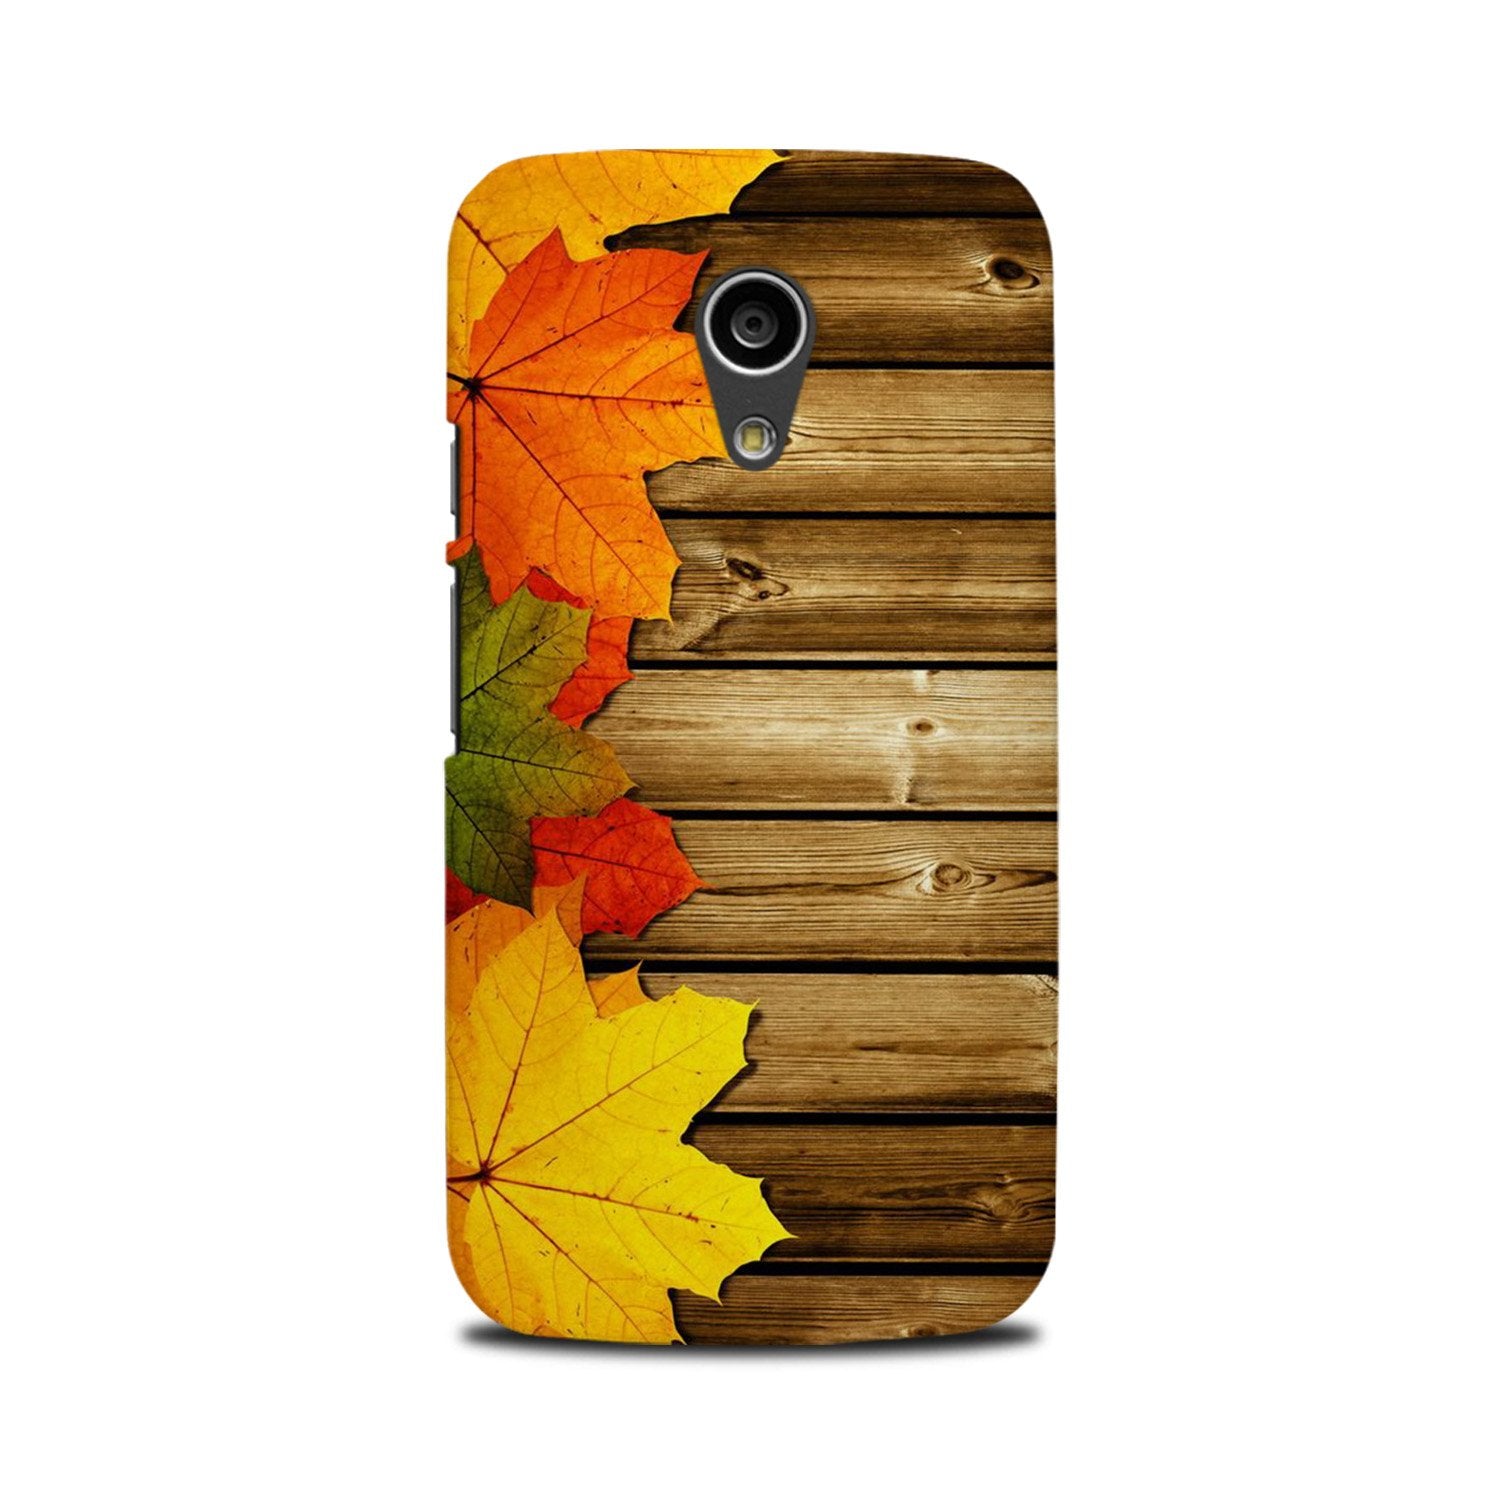 Wooden look3 Case for Moto G2